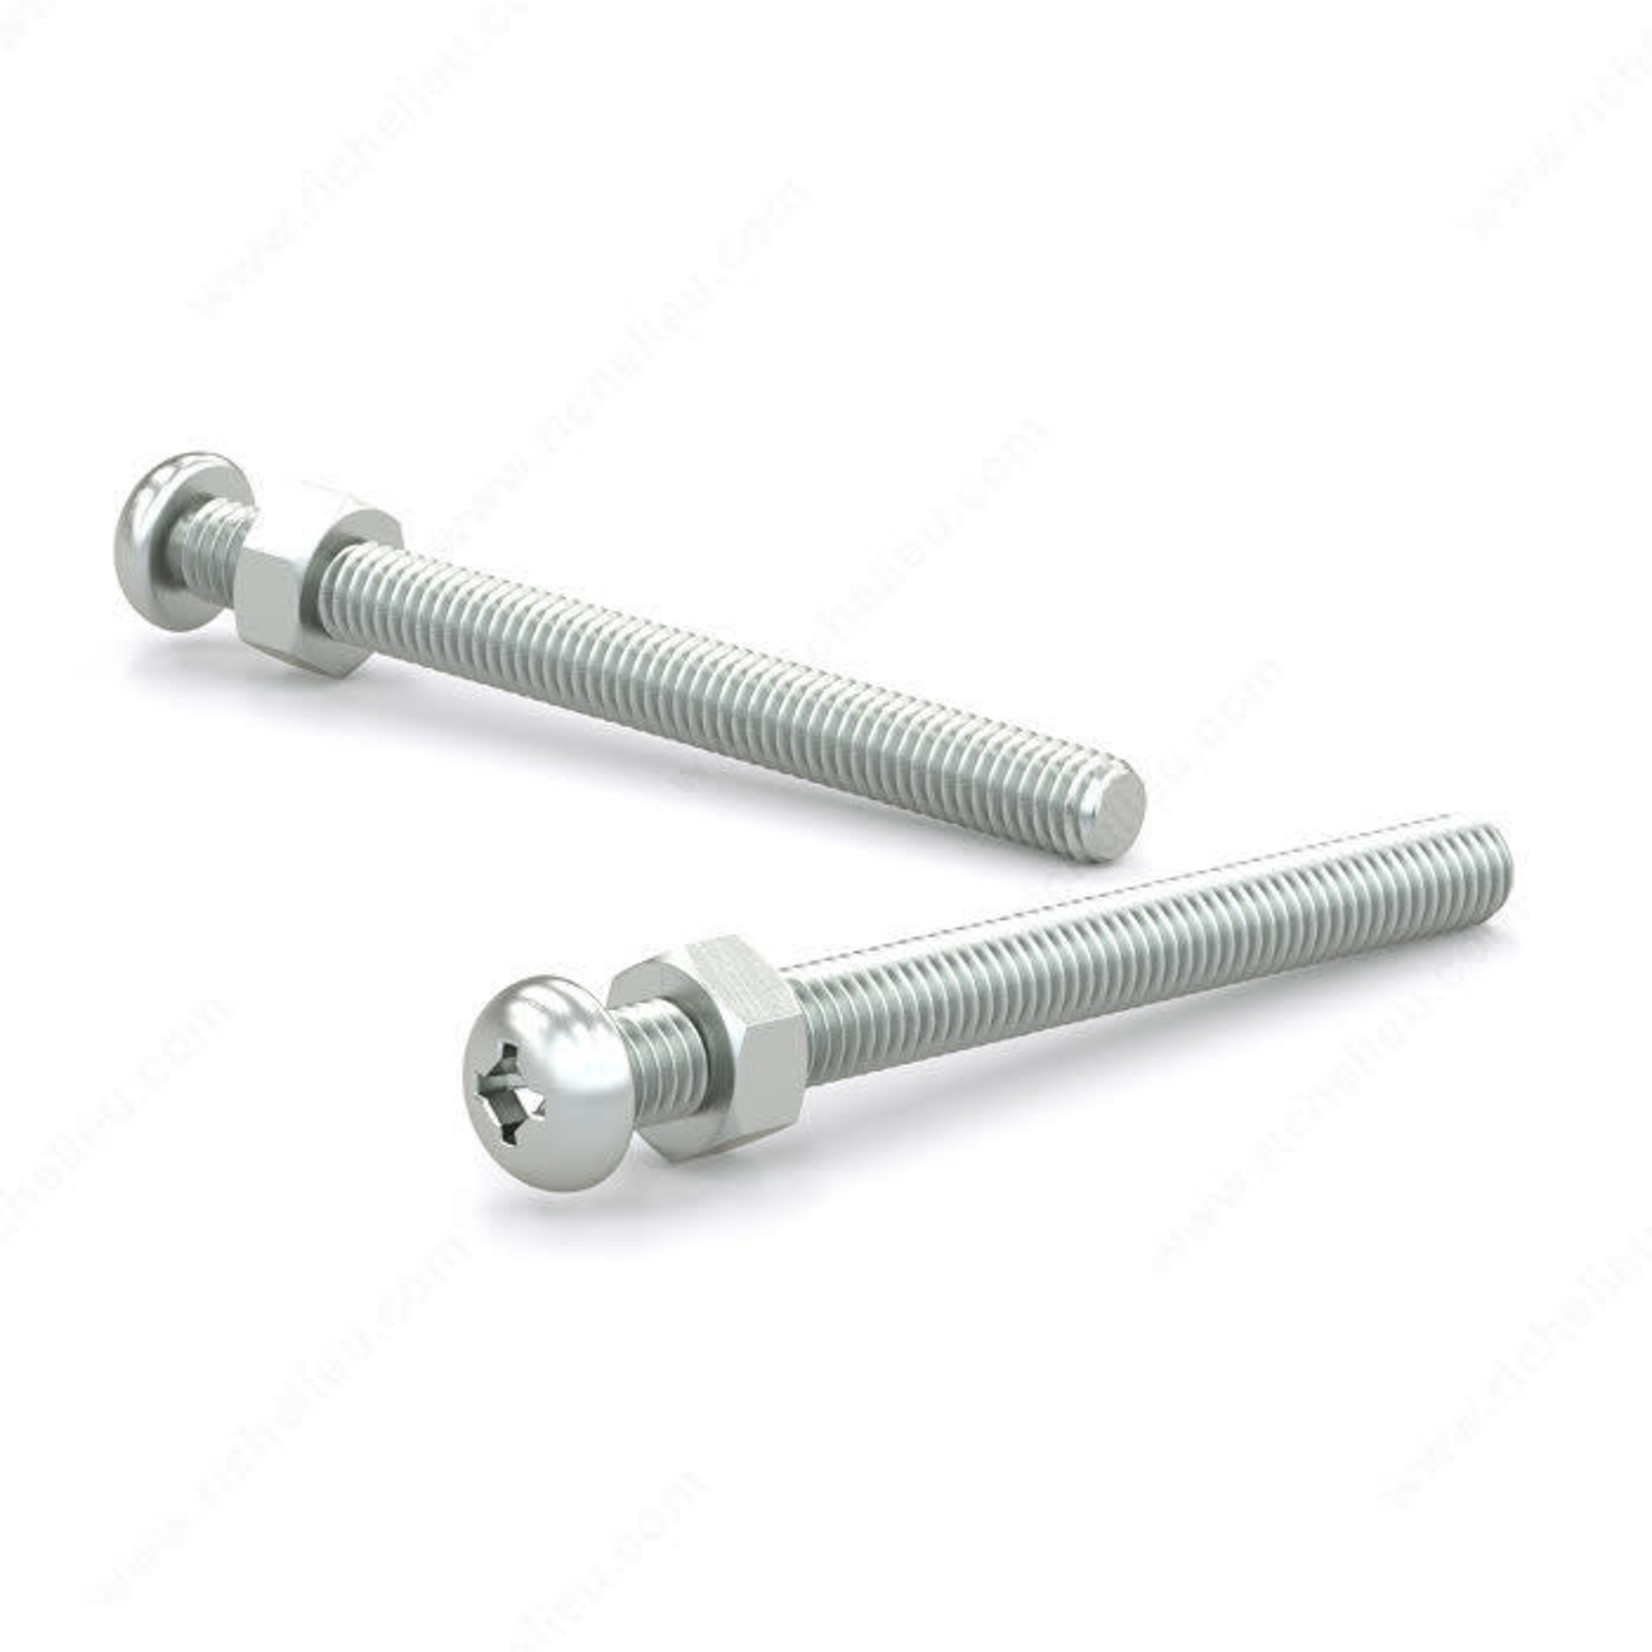 RELIABLE MACHINE SCREW WITH NUT, PAN HEAD, 10-32 2IN, 8PK BLISTER